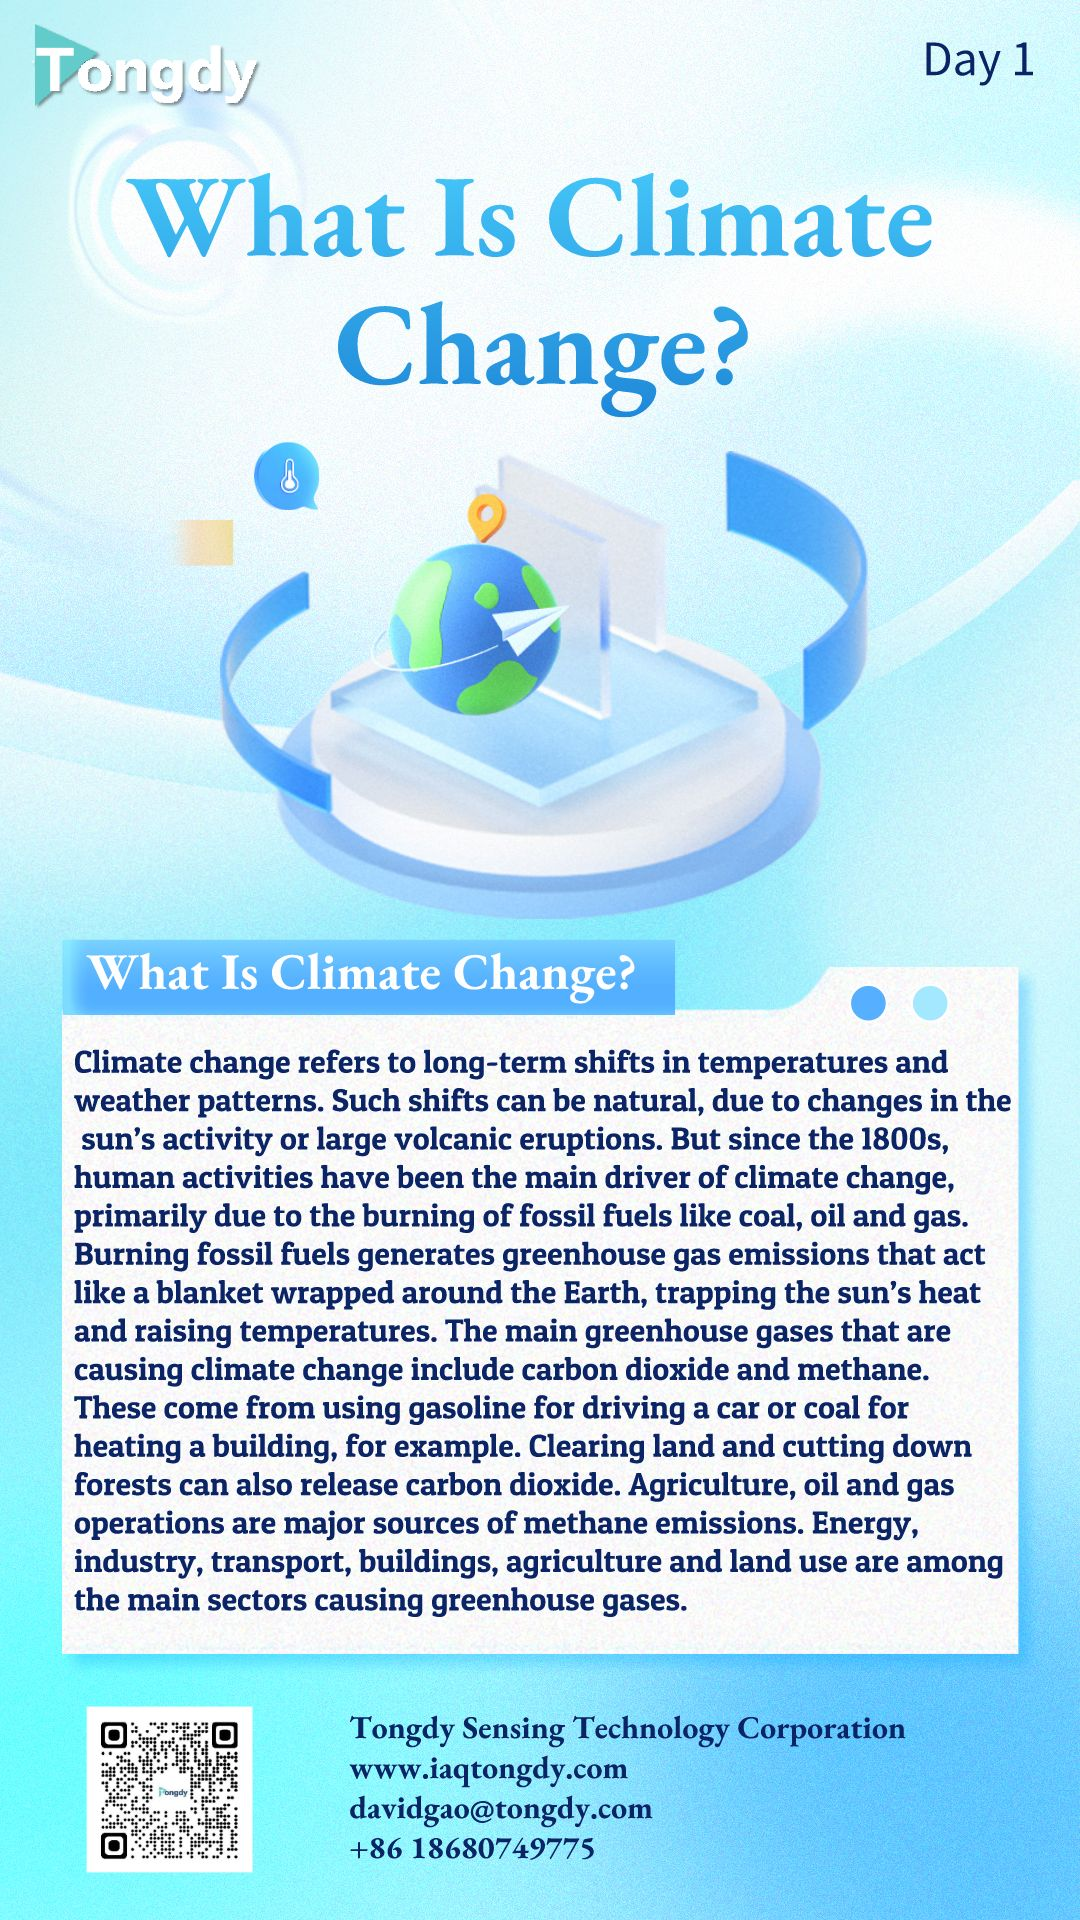 Day 1 What Is Climate Change?